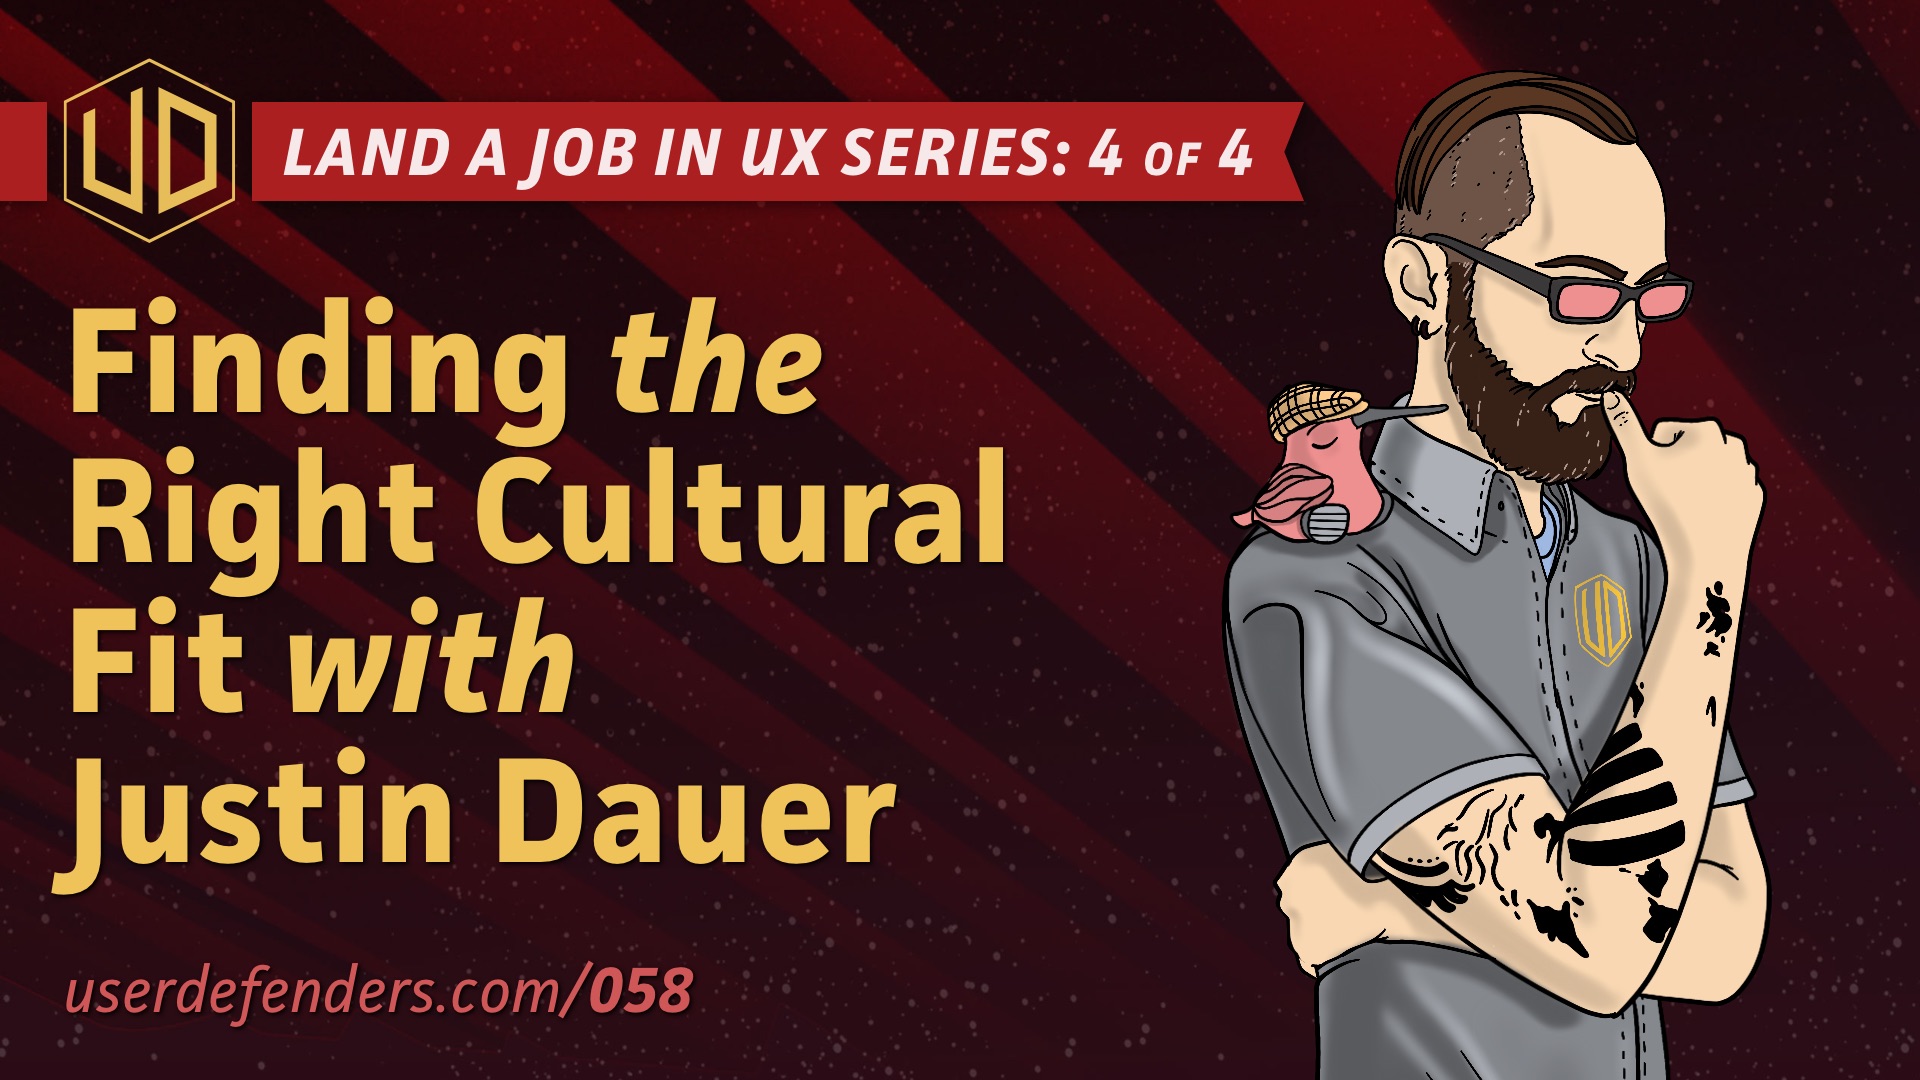 Land a Job in UX Series: User Defenders: Podcast with Justin Dauer on Finding the Right Culture Fit